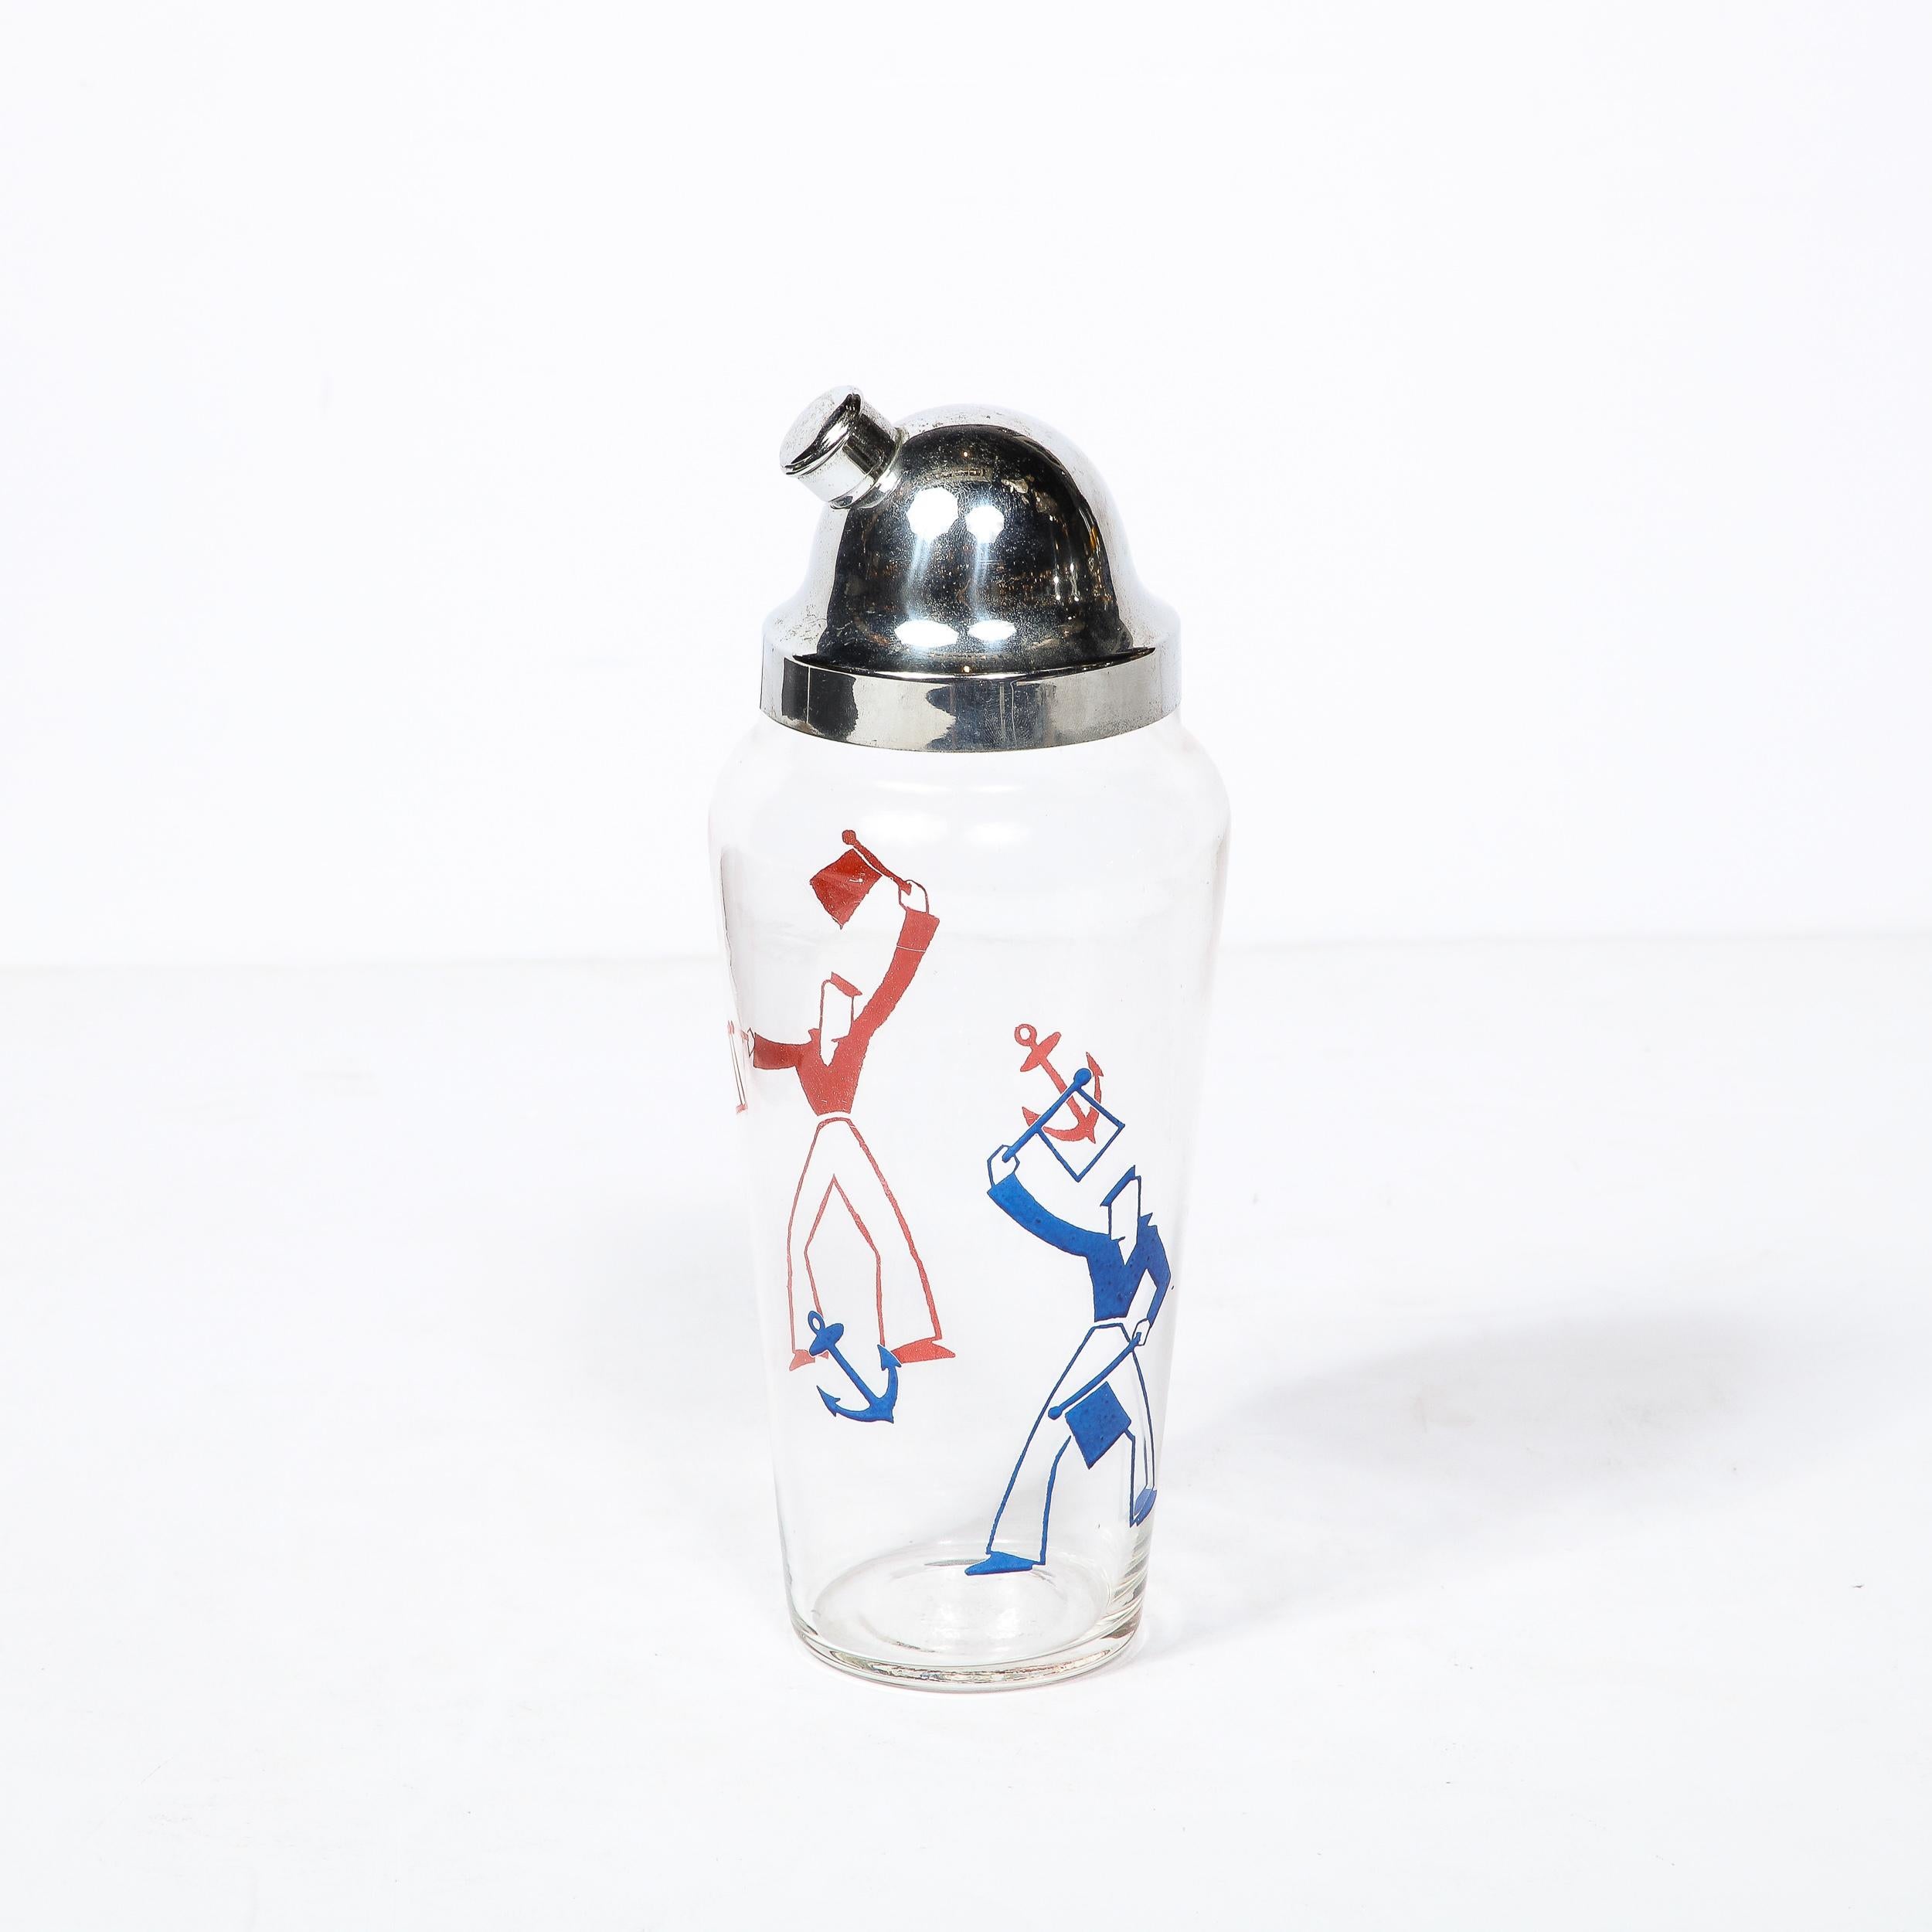 This Art Deco Cocktail Shaker originates from the United States Circa 1930. The Body of this piece is made in translucent glass with a charming motif of sailors in the Art Deco style waving flags rendered in blue and red enamel paint, as though